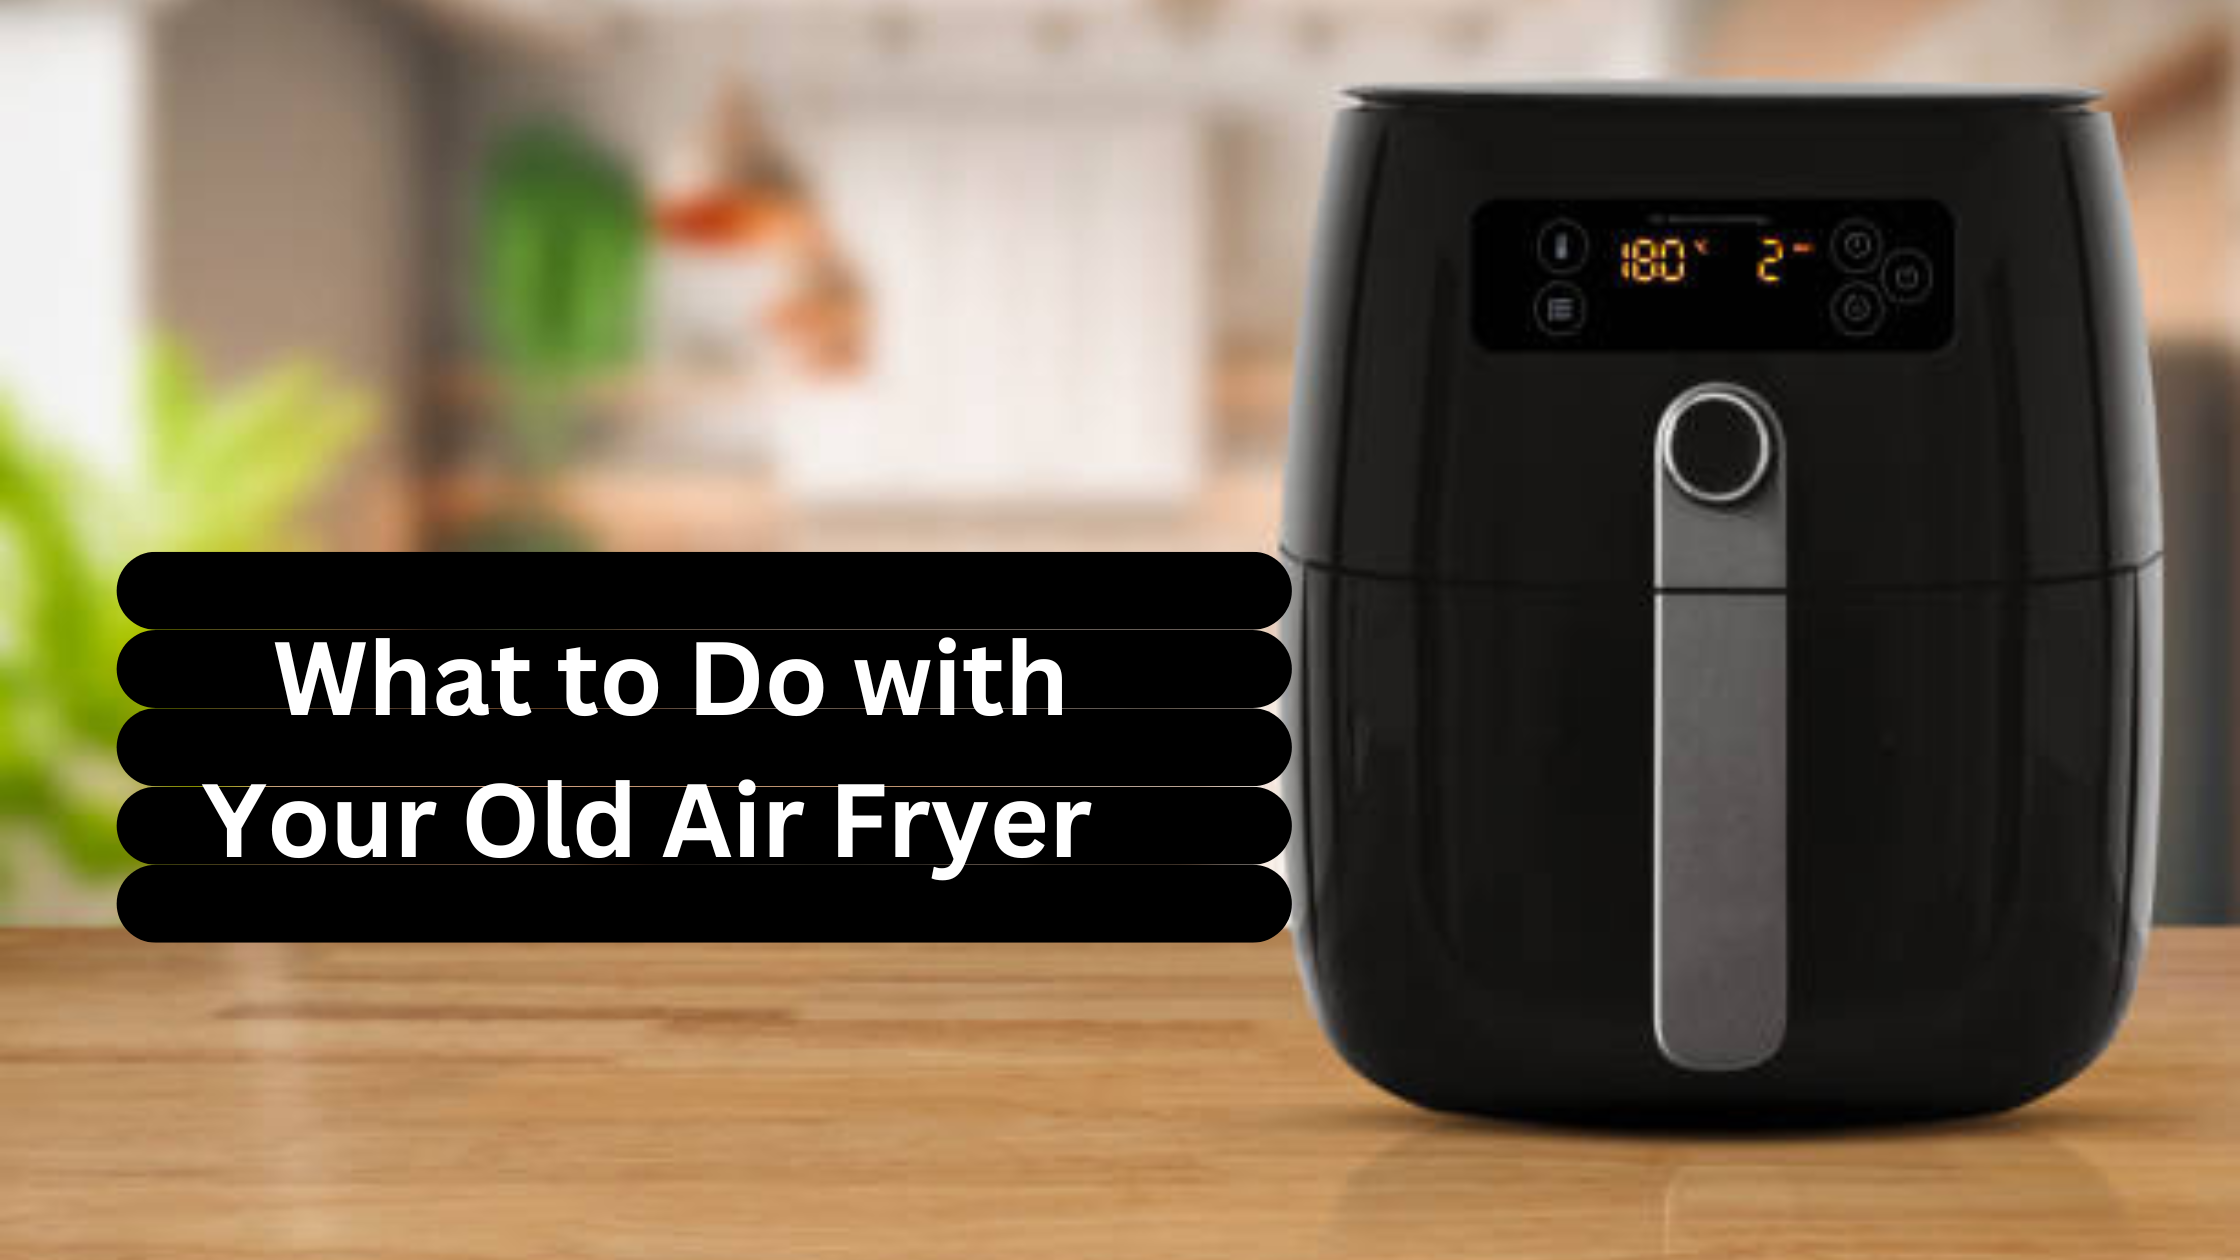 What to Do with Your Old Air Fryer